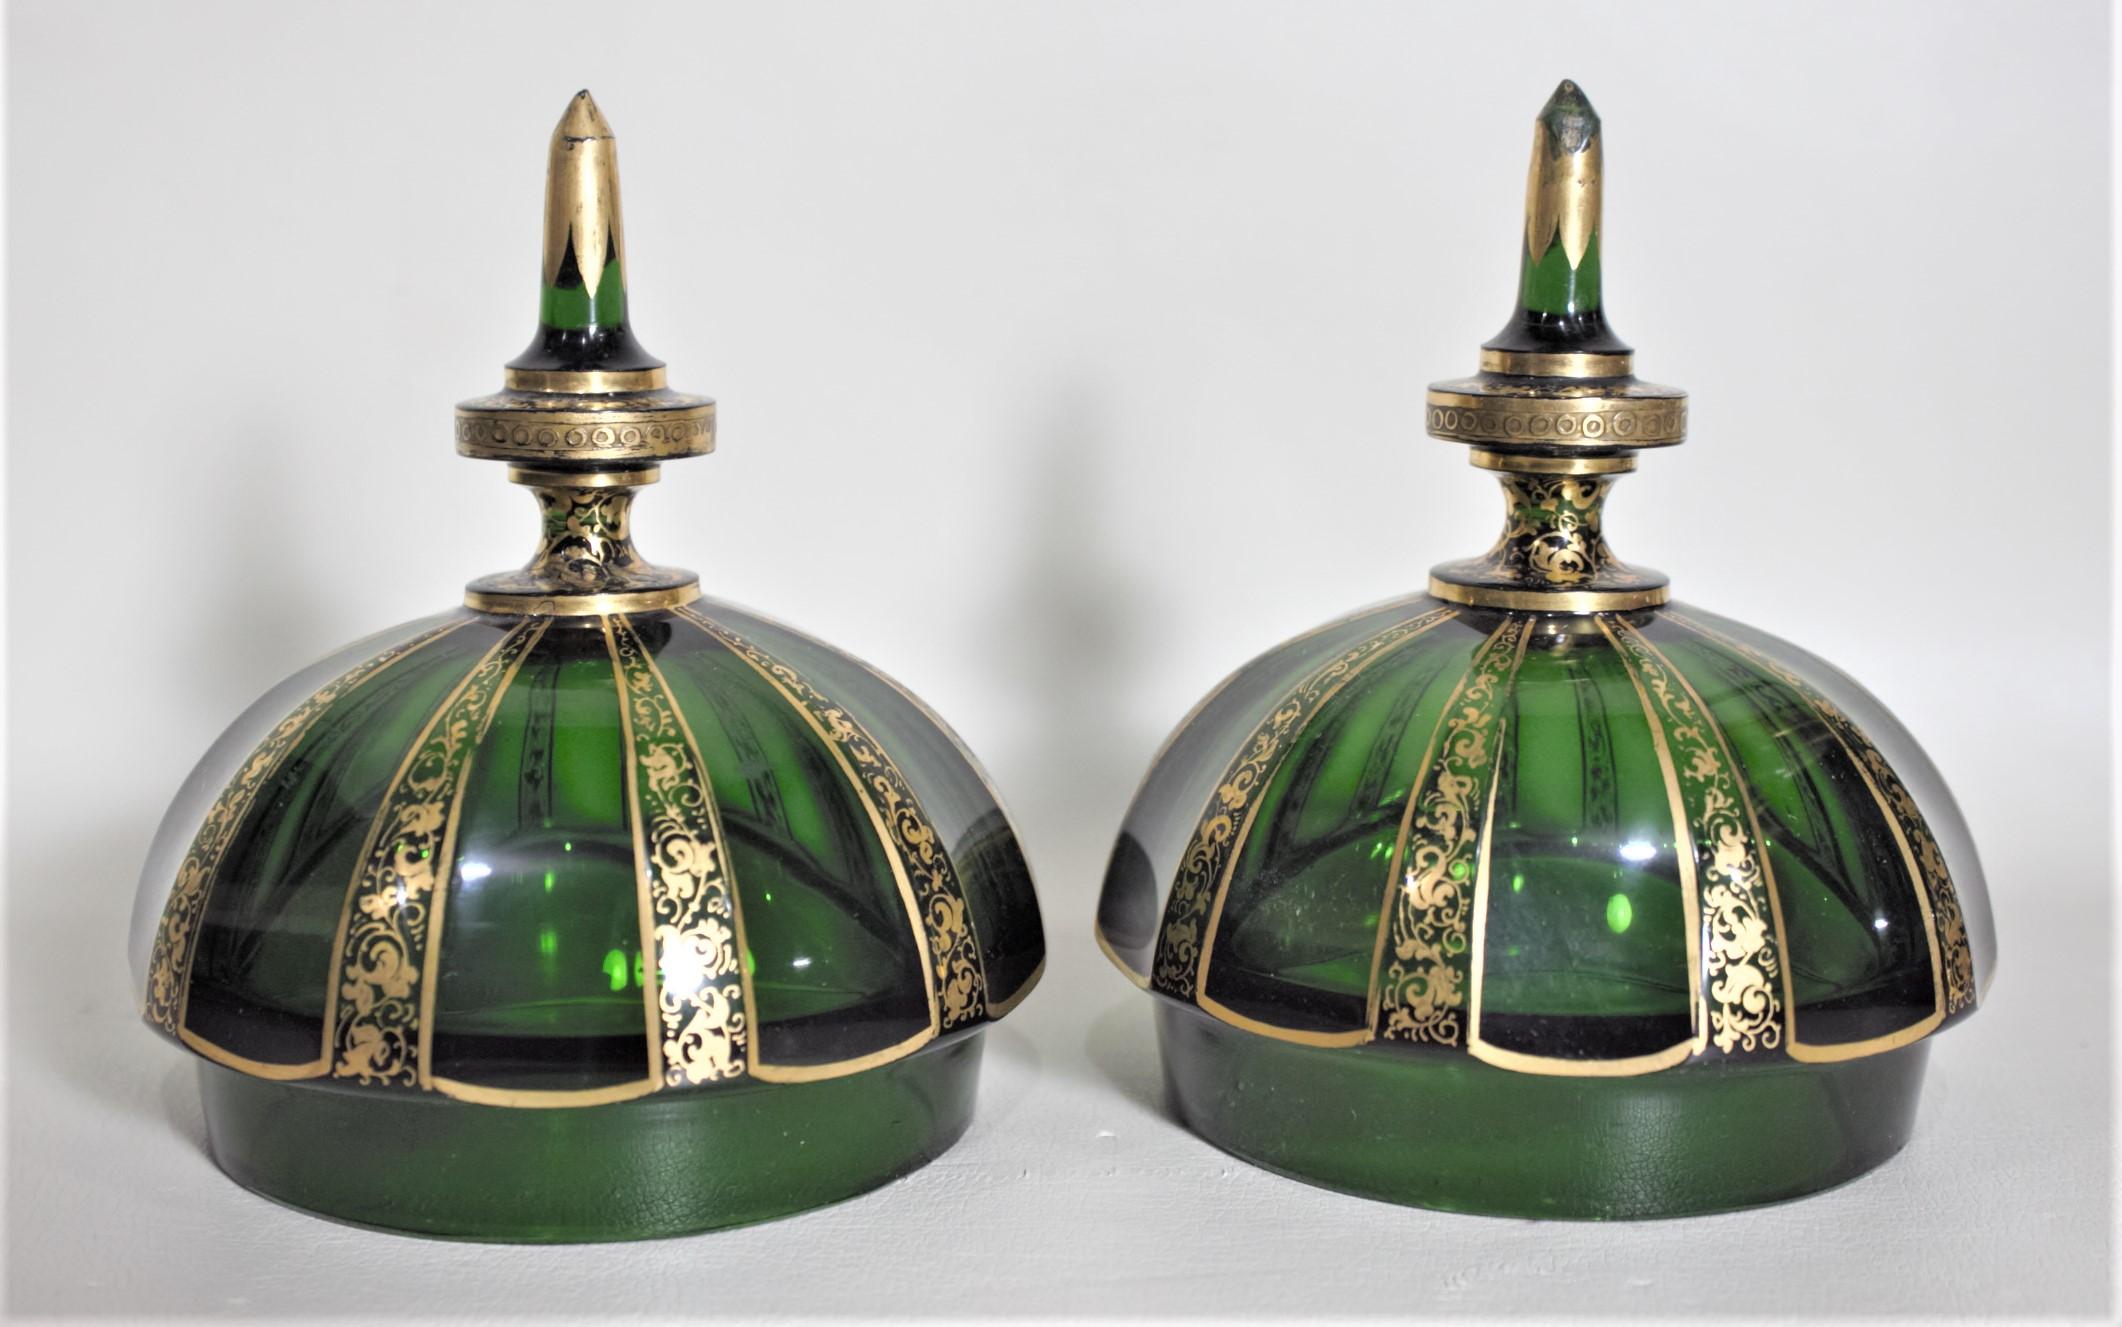 Pair of Antique Green Bohemian Covered Glass Urns with Heavy Gilt Decoration For Sale 6